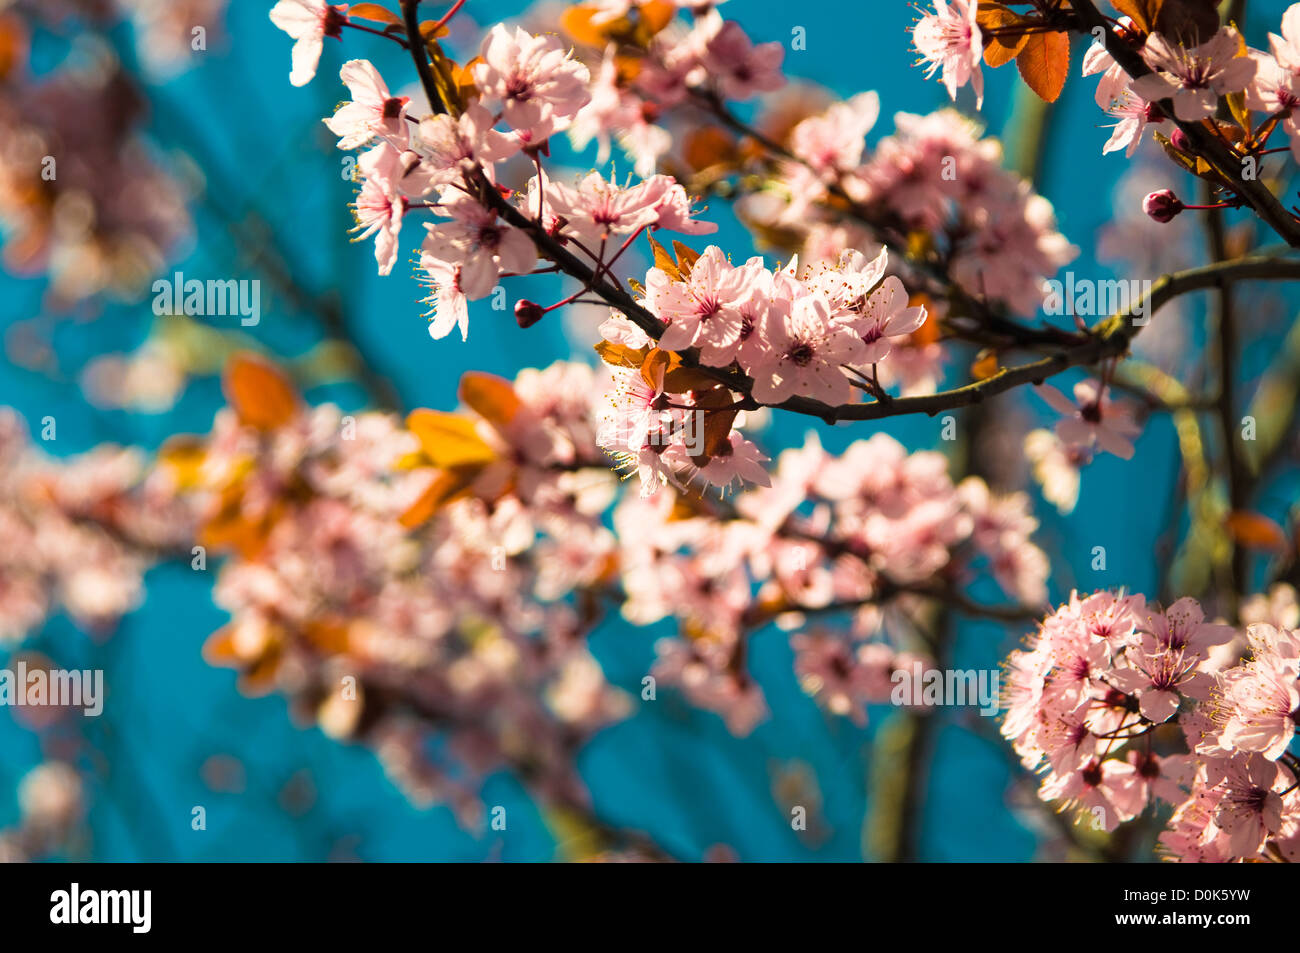 Blossoms on a tree in Lamas Park. Stock Photo